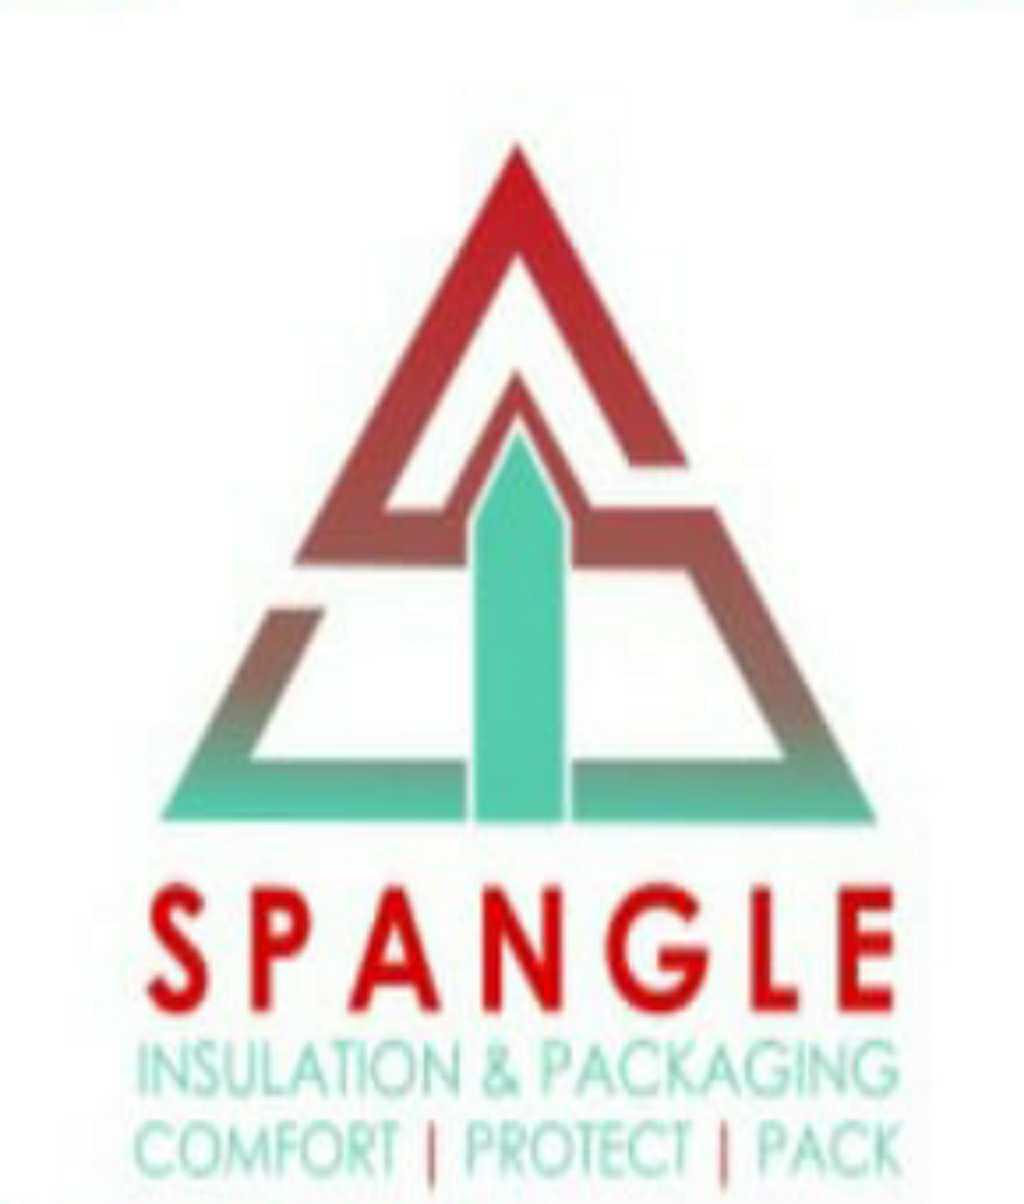 Spangle Insulation and Packaging